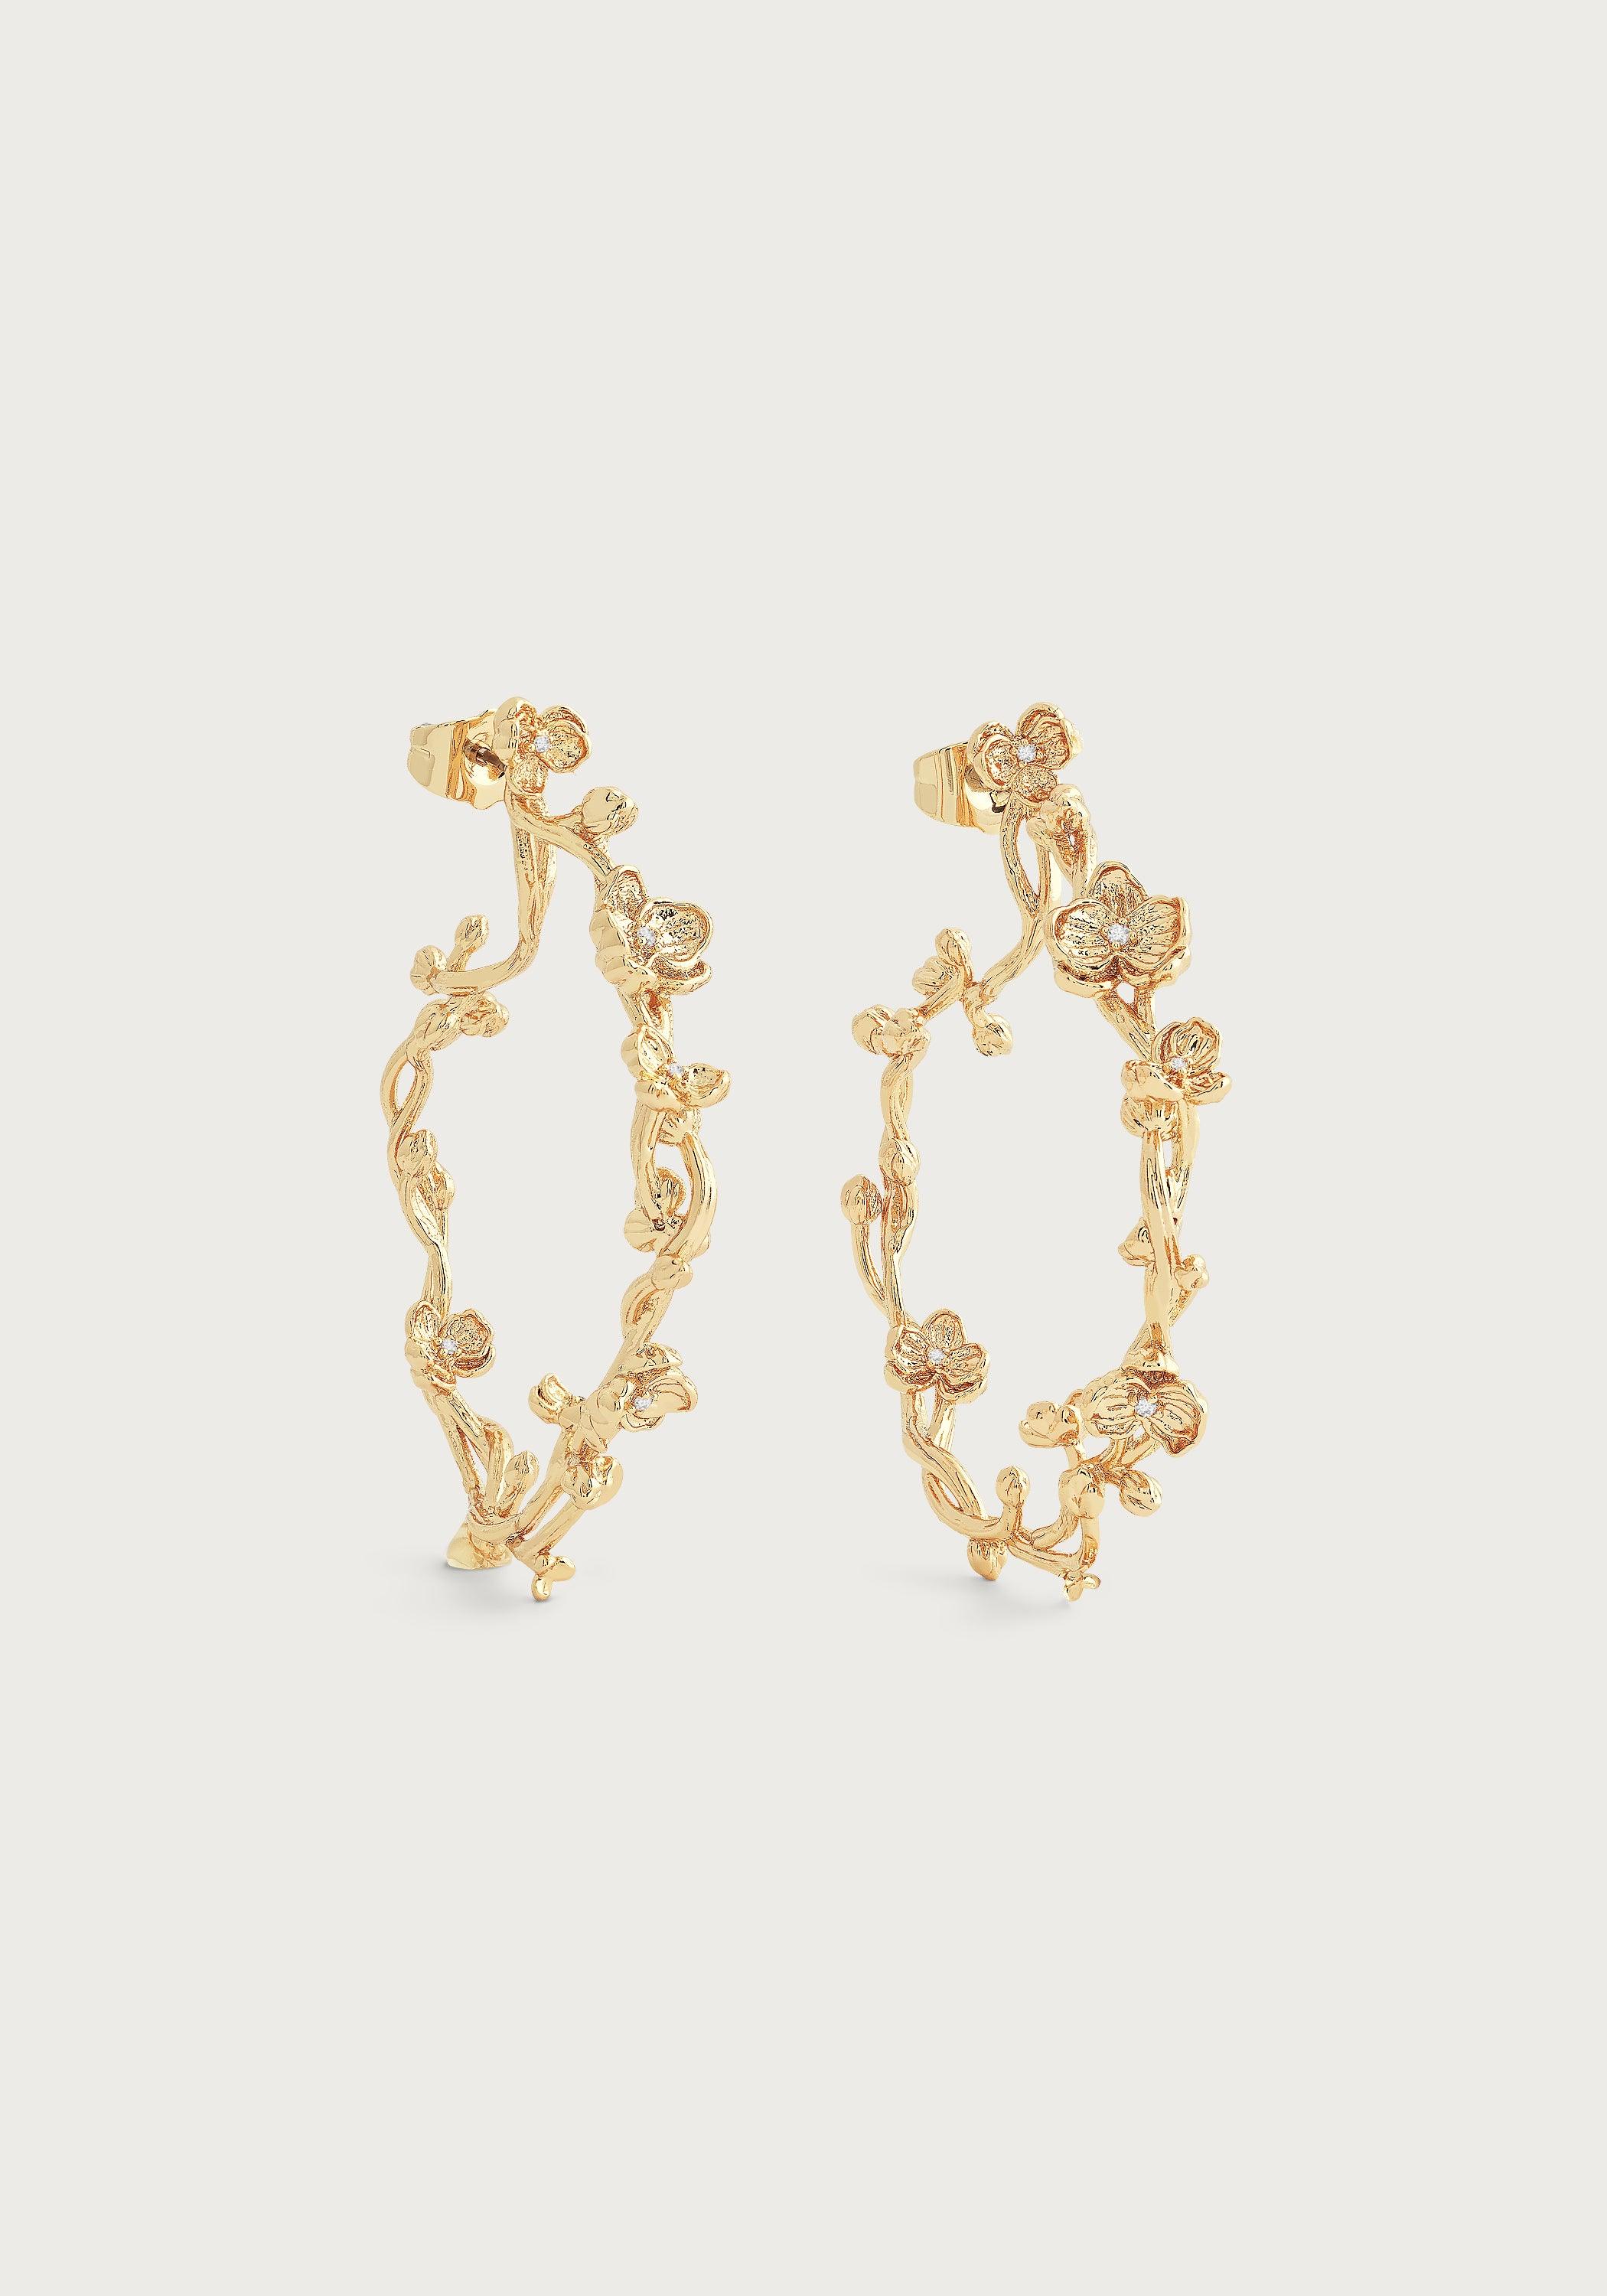 Jewelry, 18 Karat Gold Not Plated Lv Blossom Earrings